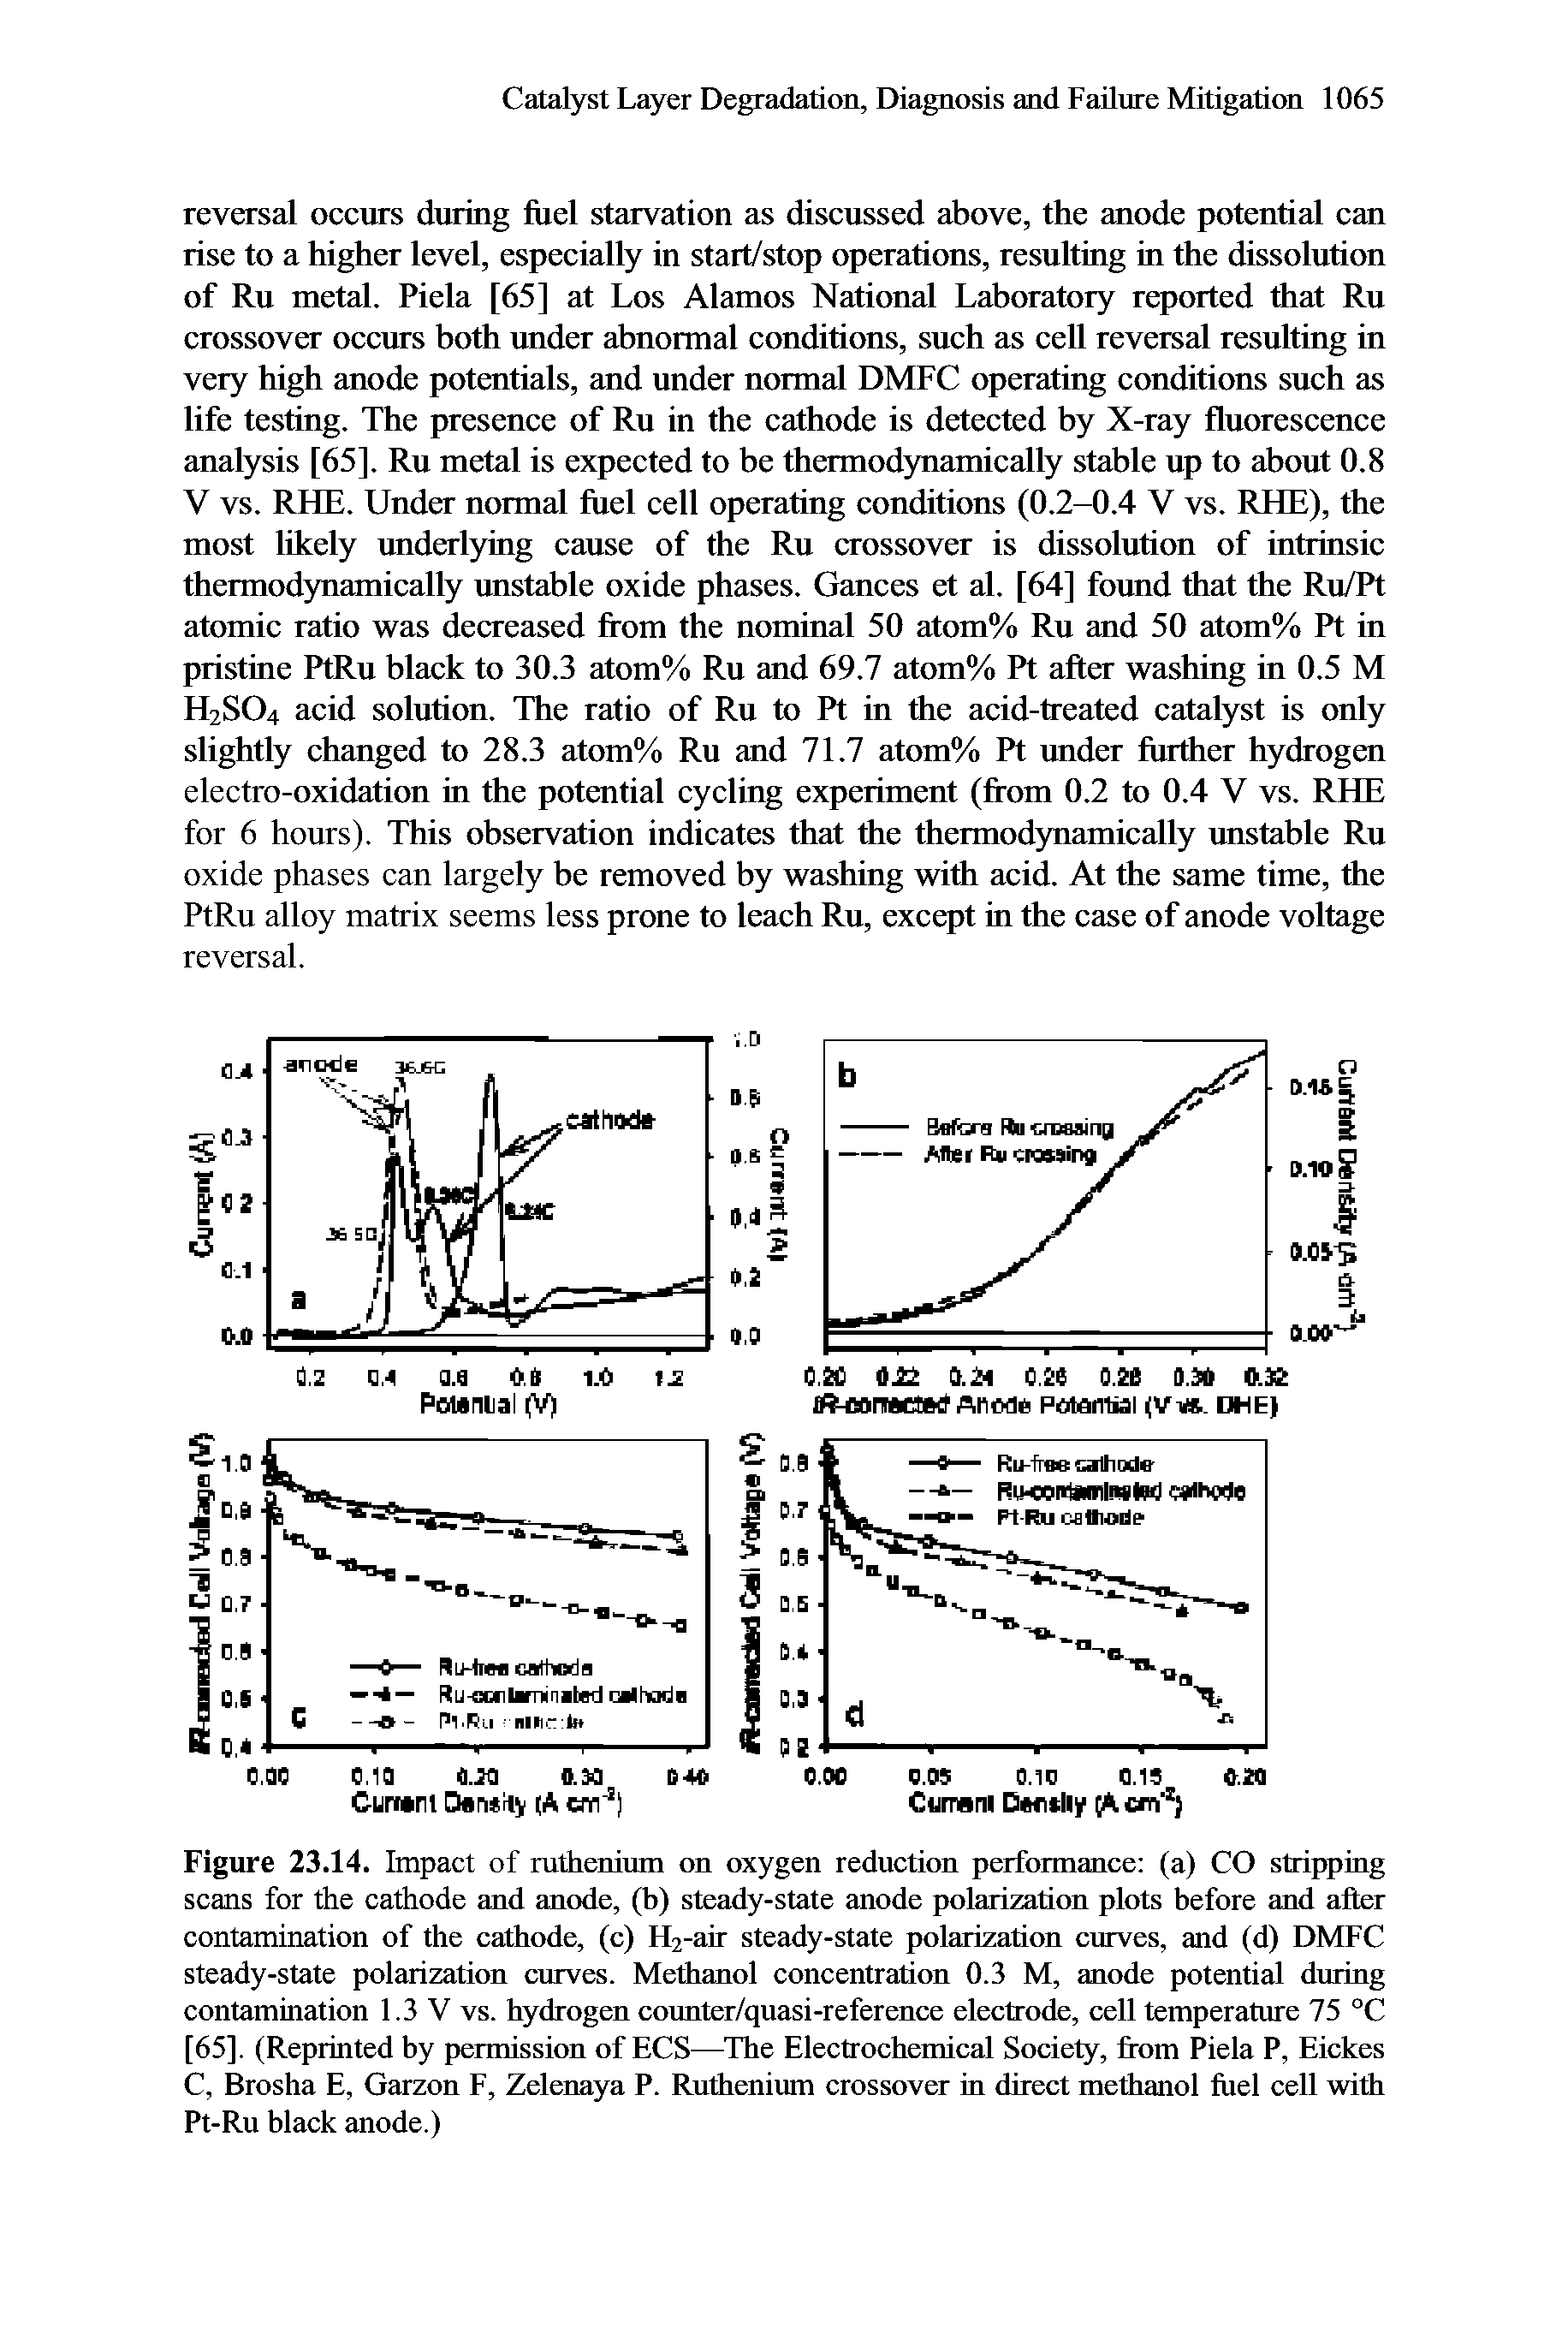 Figure 23.14. Impact of ruthenium on oxygen reduction performance (a) CO stripping scans for the cathode and anode, (b) steady-state anode polarization plots before and alter contamination of the eathode, (c) H2-air steady-state polarization curves, and (d) DMFC steady-state polarization curves. Methanol concentration 0.3 M, anode potential during contamination 1.3 V vs. hydrogen counter/quasi-reference electrode, cell temperature 75 °C [65]. (Reprinted by permission of ECS— The Electrochemical Society, from Piela P, Eickes C, Brosha E, Garzon F, Zelenaya P. Ruthenium crossover in direct methanol fuel cell with Pt-Ru black anode.)...